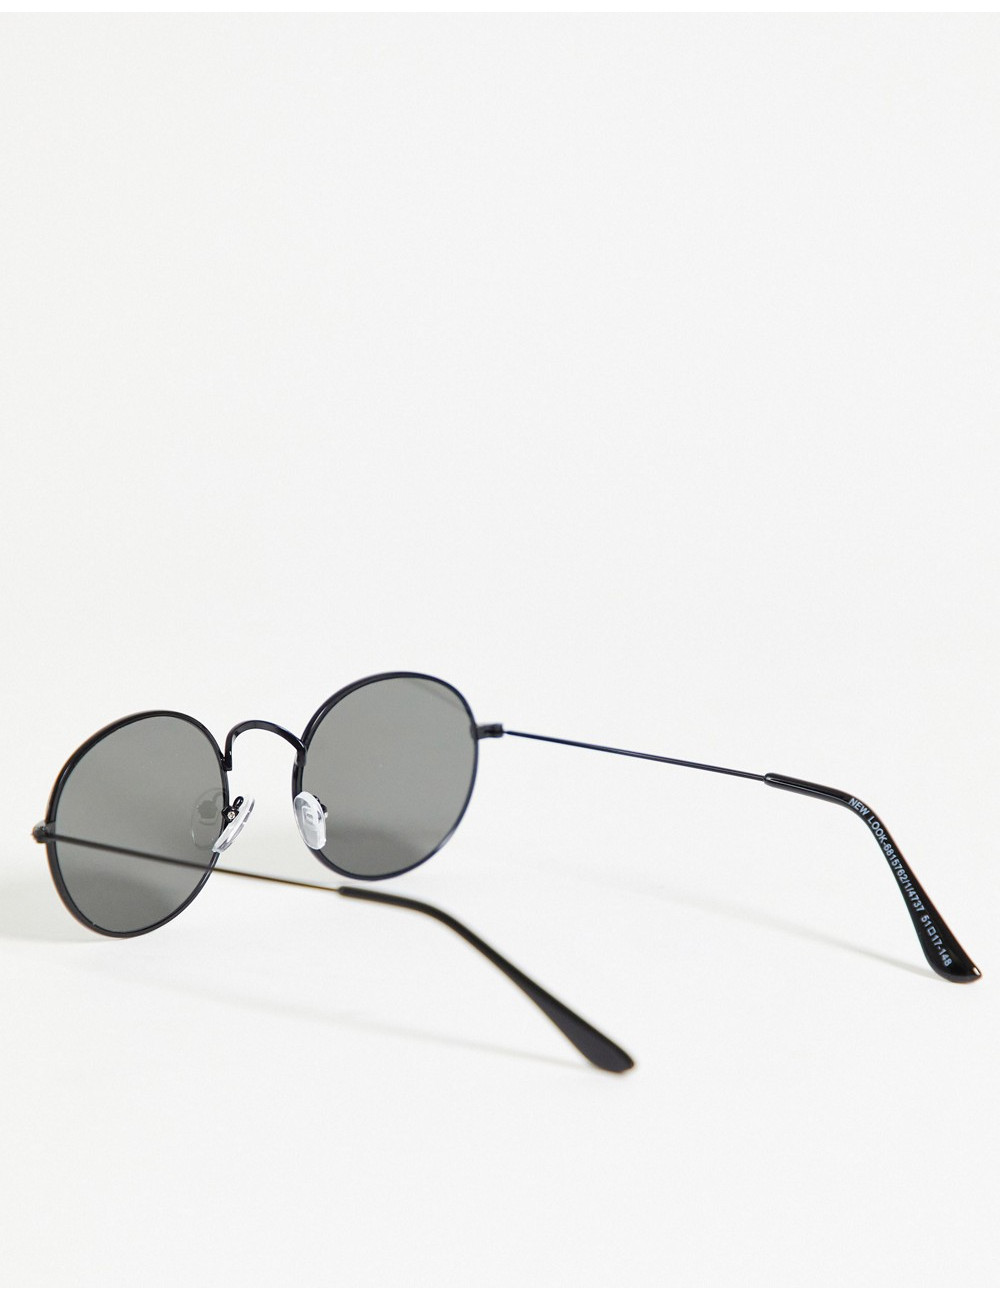 New Look oval sunglasses in...